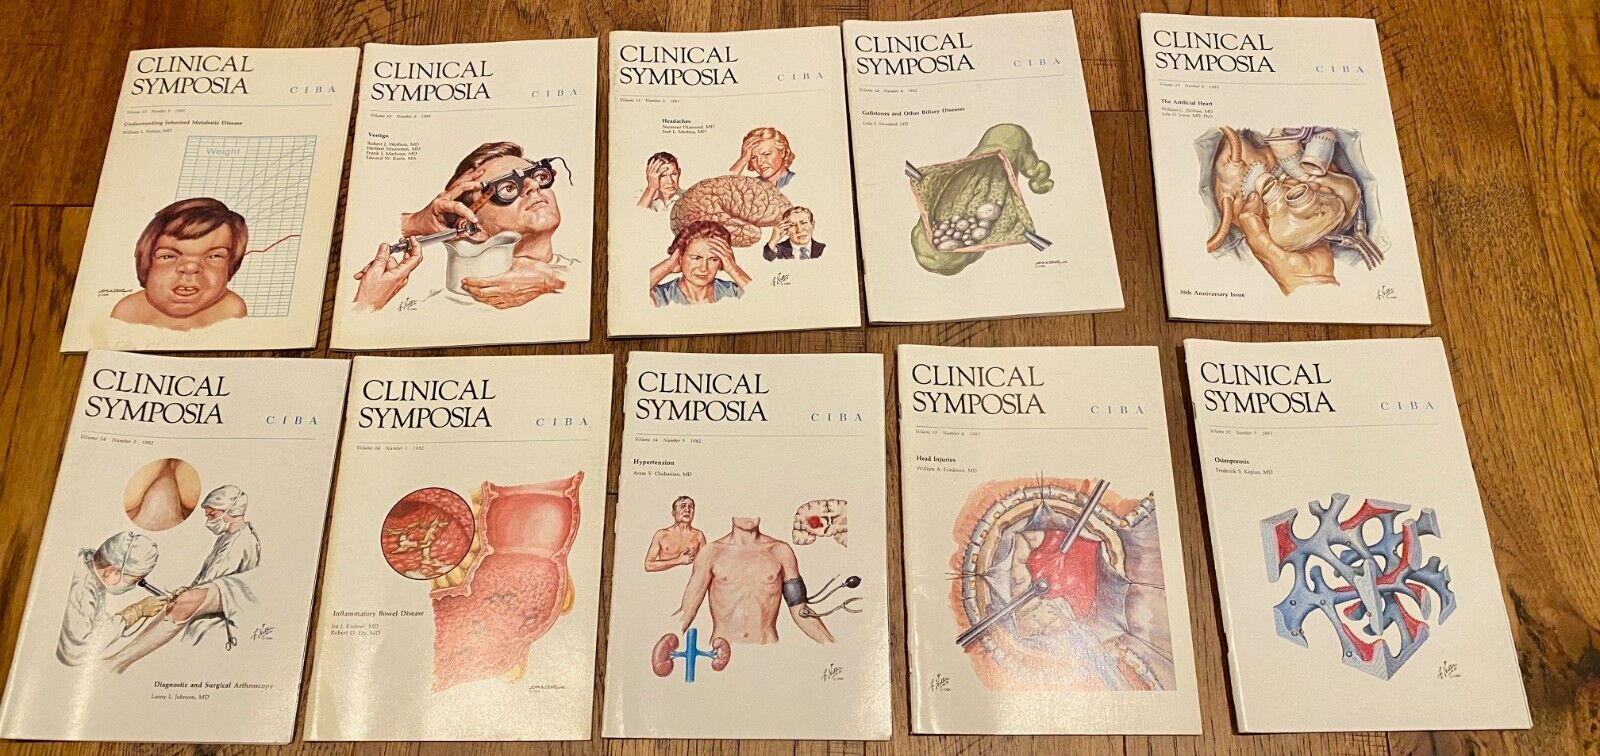 Clinical Symposia CIBA lot of 10 booklets from the 80's.  Includes binder